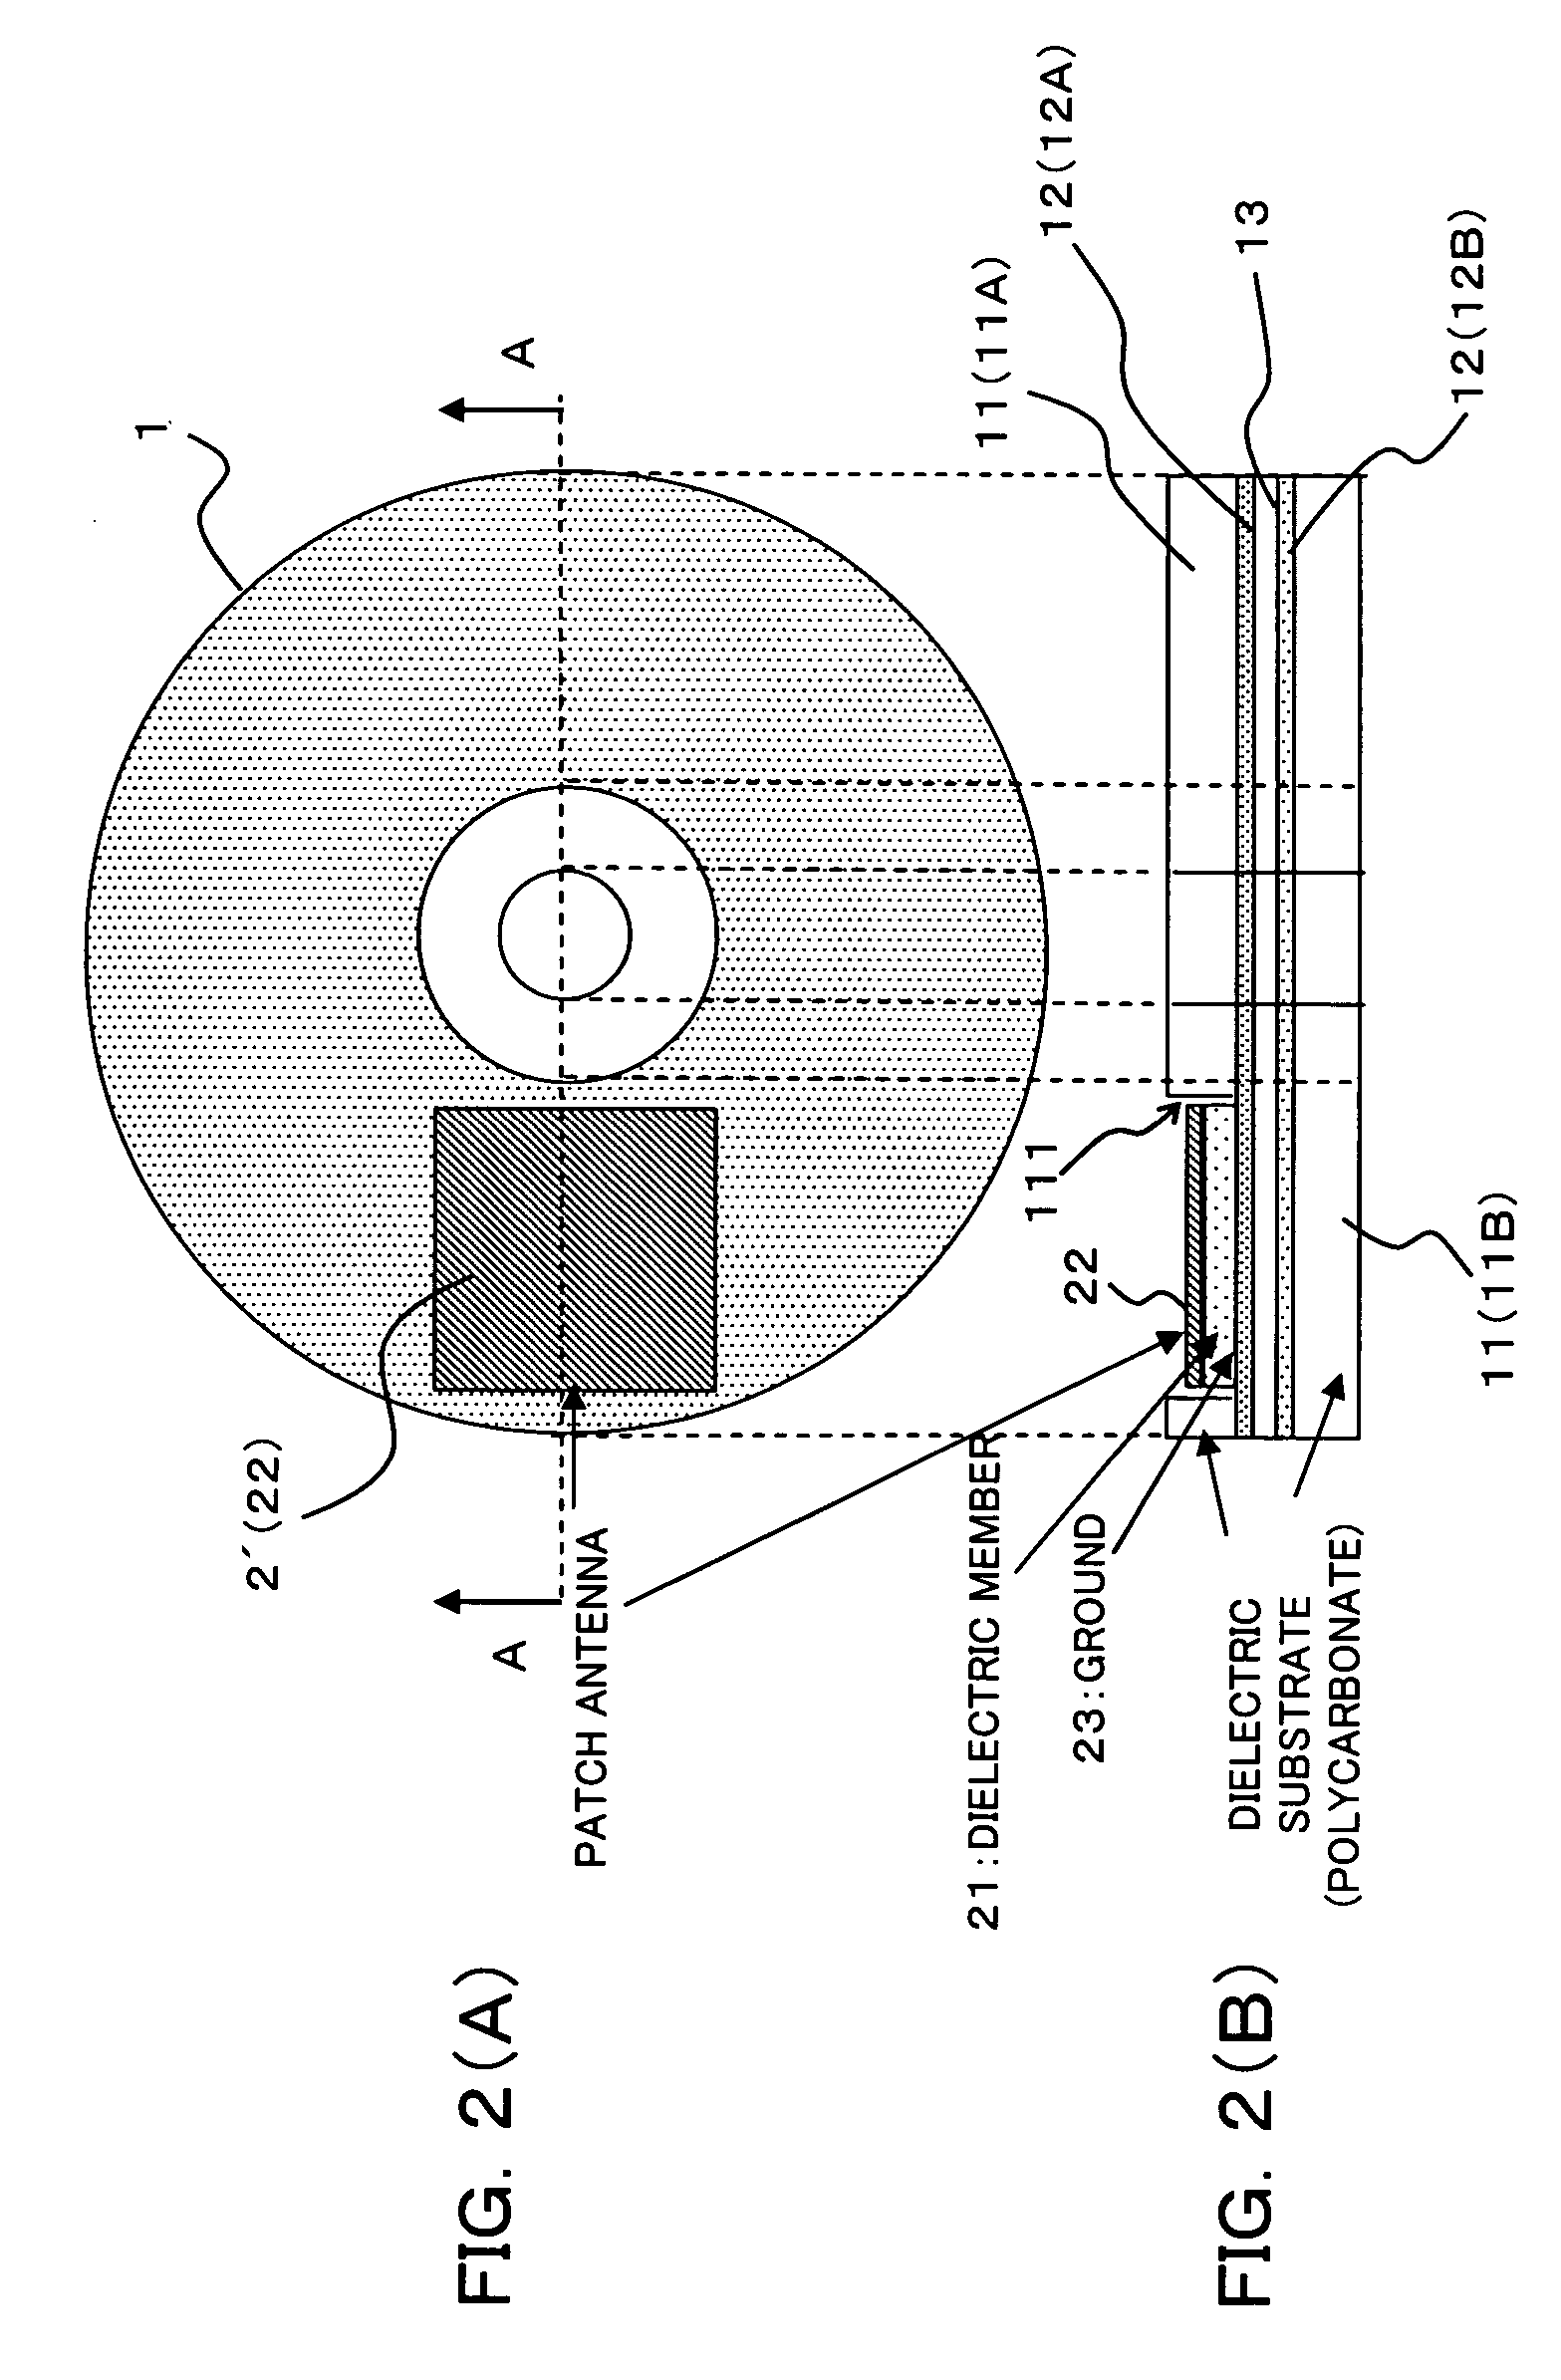 Radio tag antenna structure for an optical recording medium and a case for an optical recording medium with a radio tag antenna